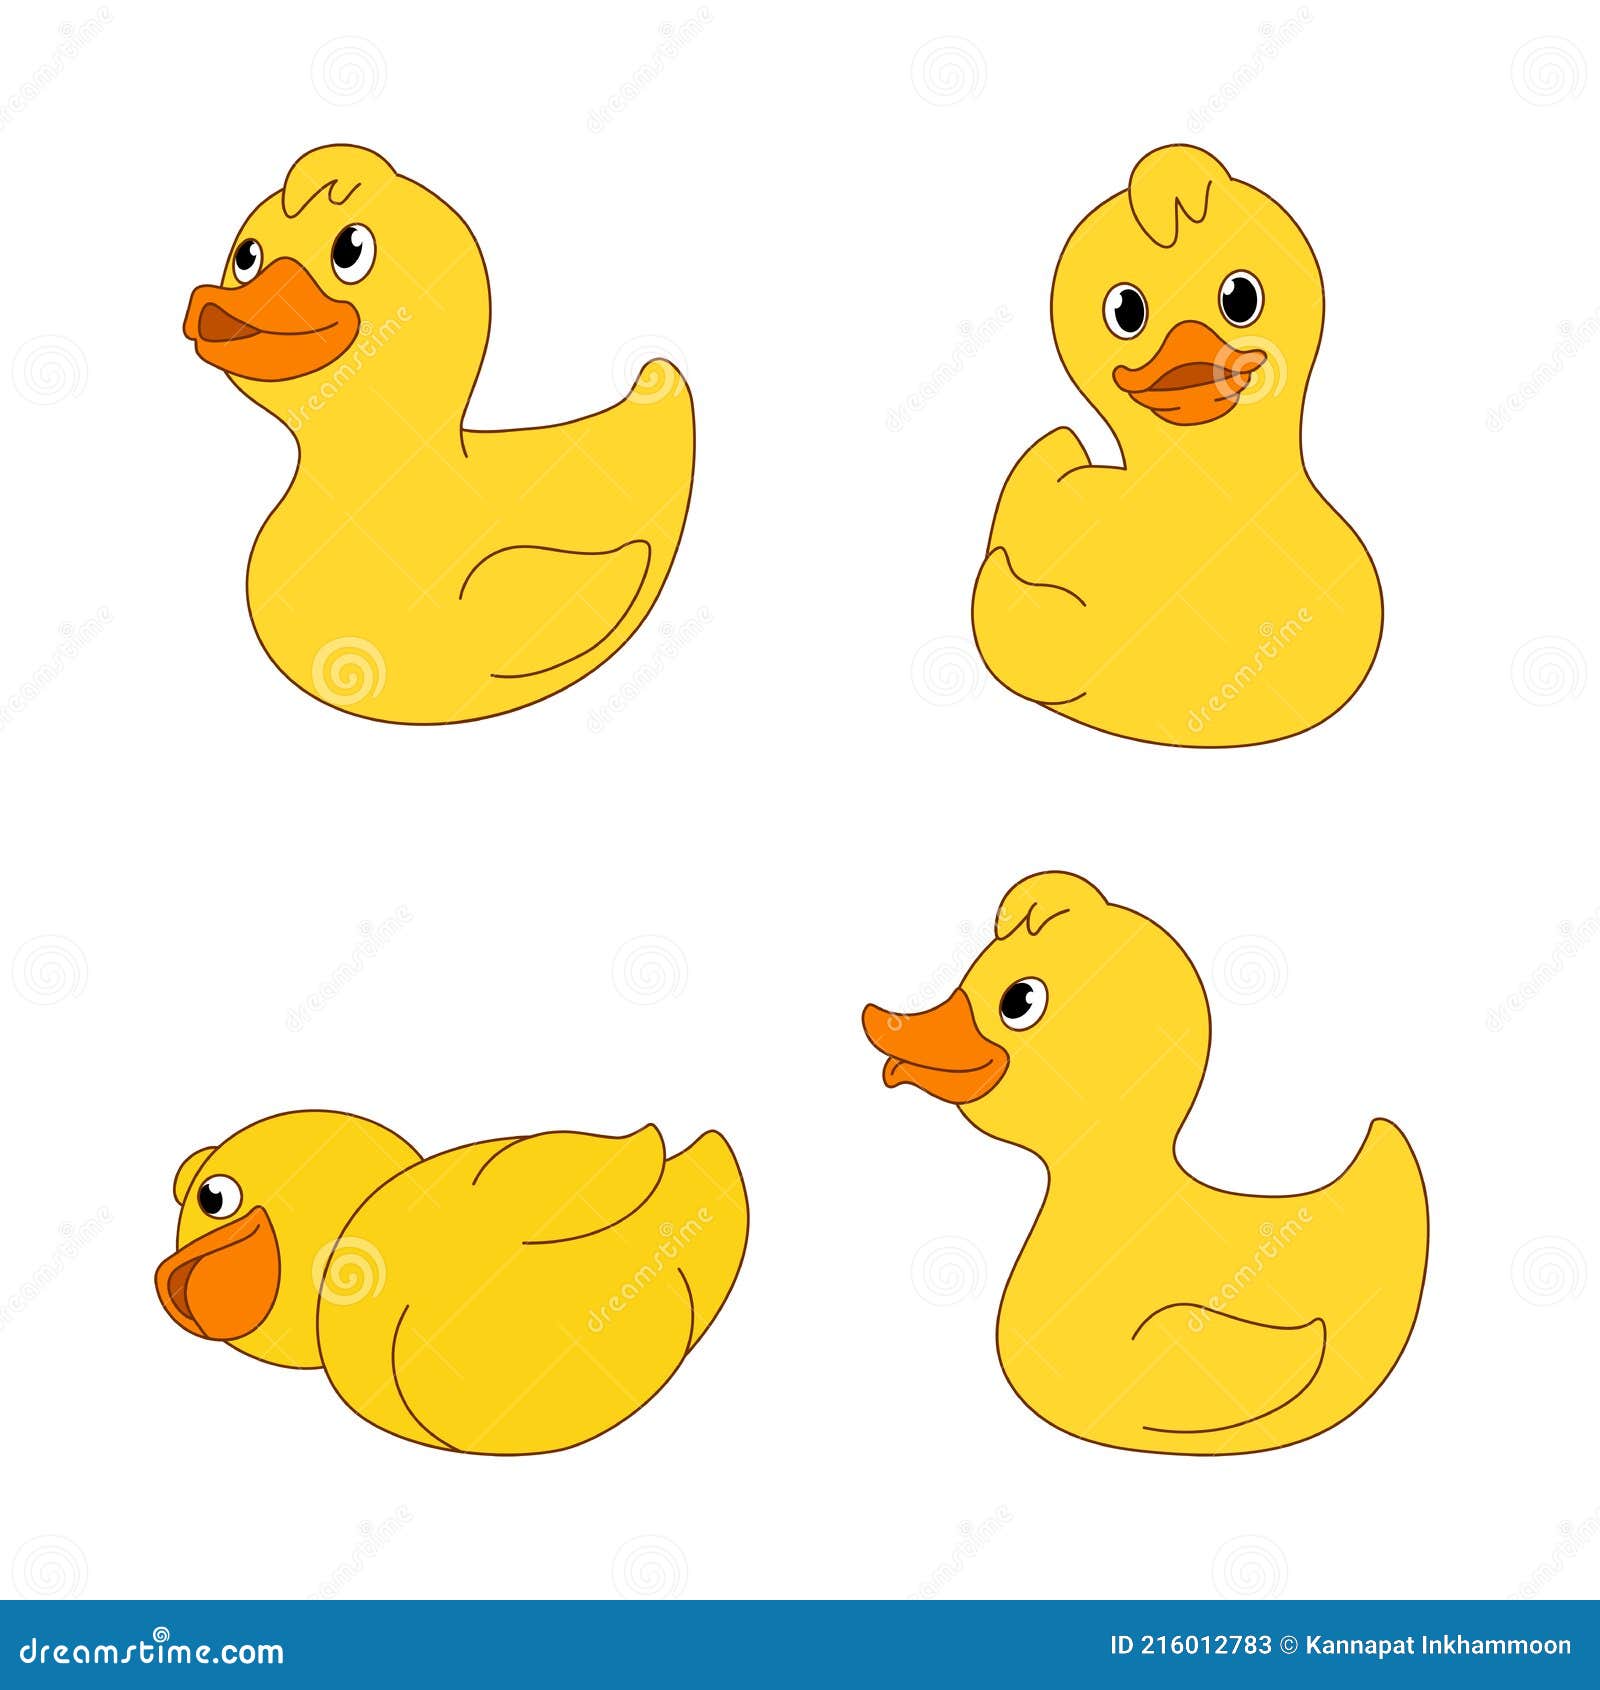 Little Yellow Duck, Chick Different Emotions and Situations Set of Cute  Illustrations, Funny Duck Cartoon Stock Vector - Illustration of cute,  beak: 216012783